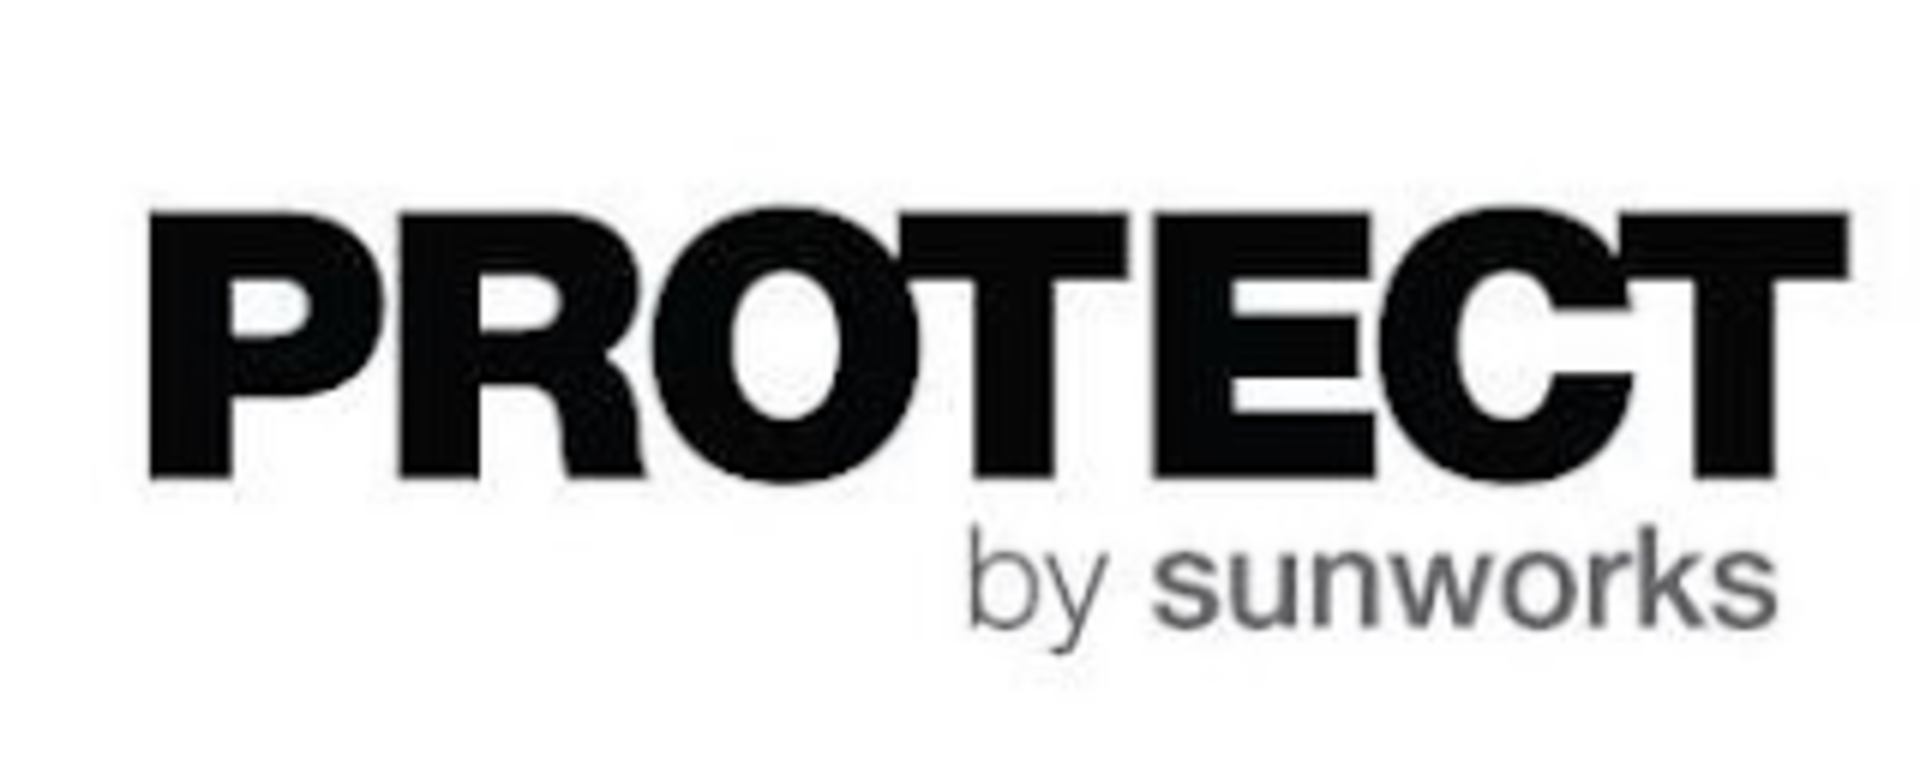 "PROTECT by sunworks" (IP-Intellectual Property)